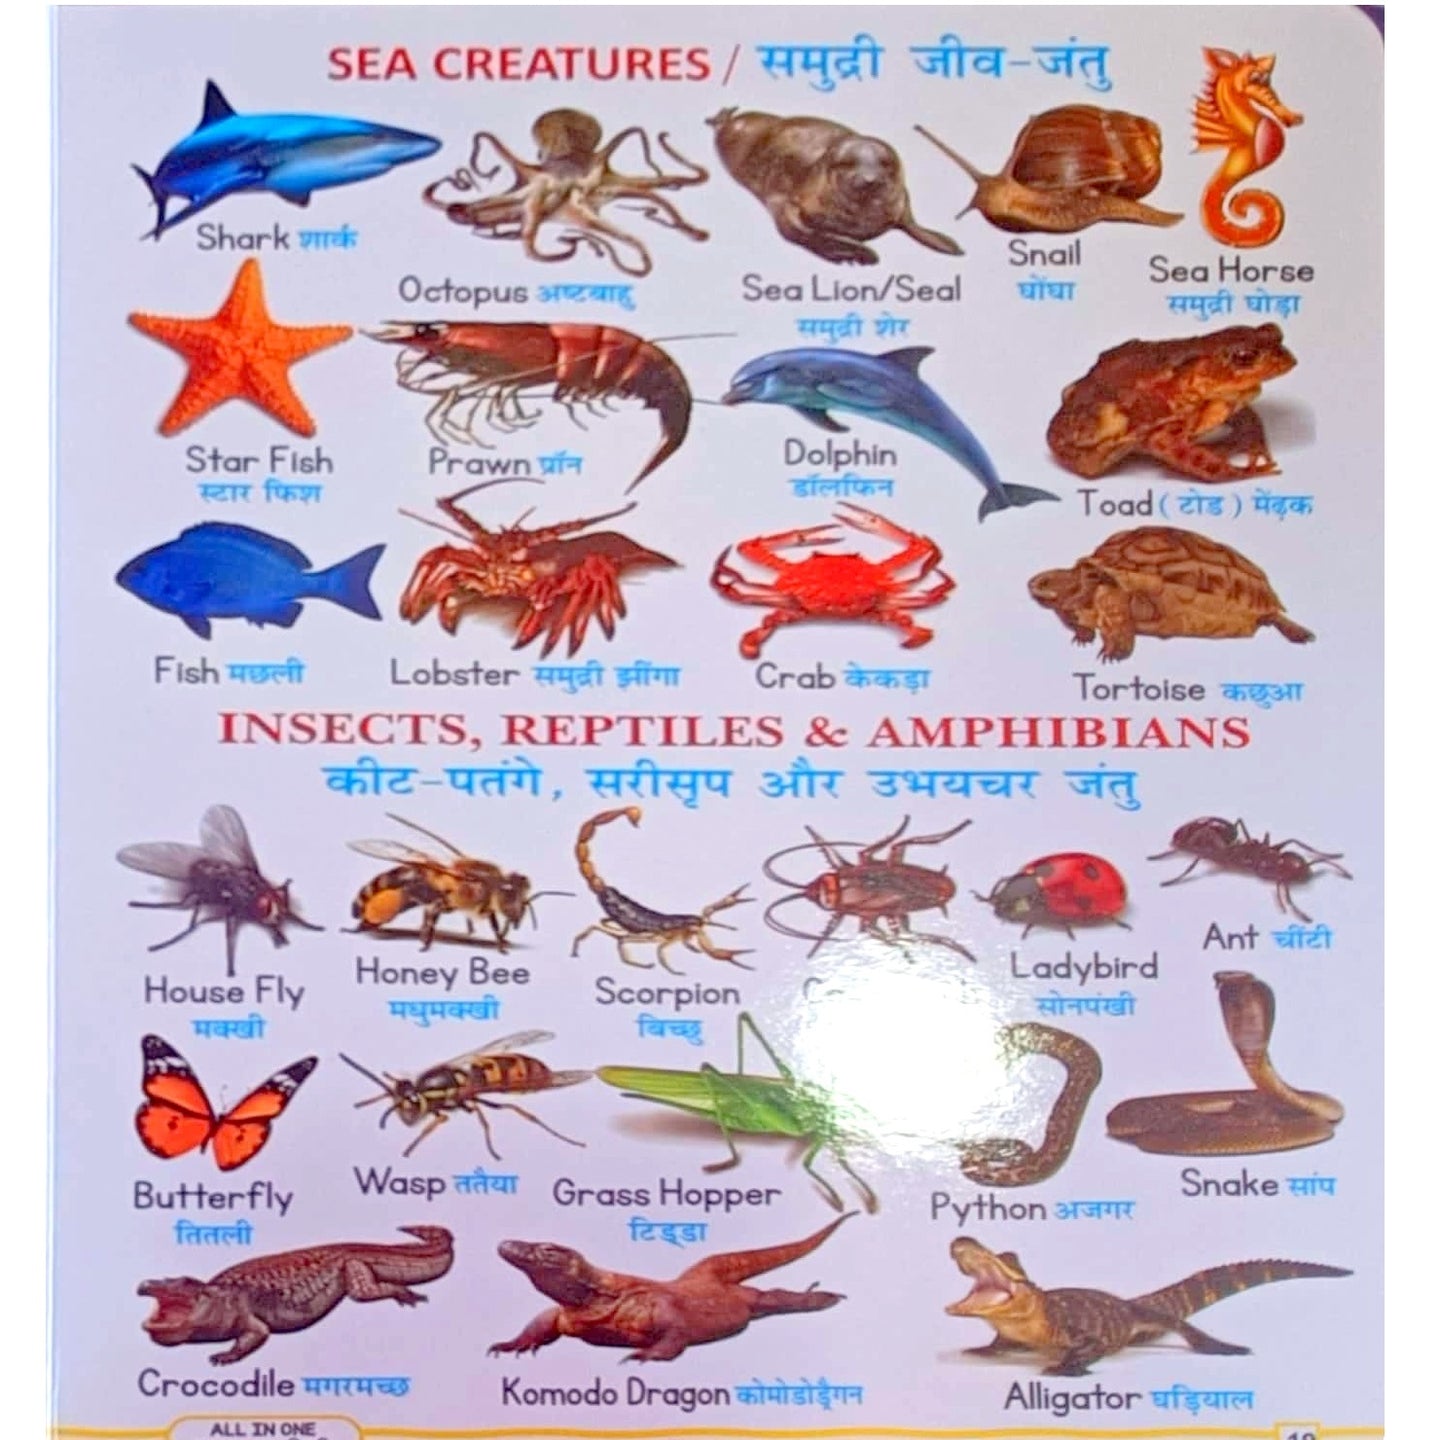 Sea creatures Photos in All in One Pictorial Book